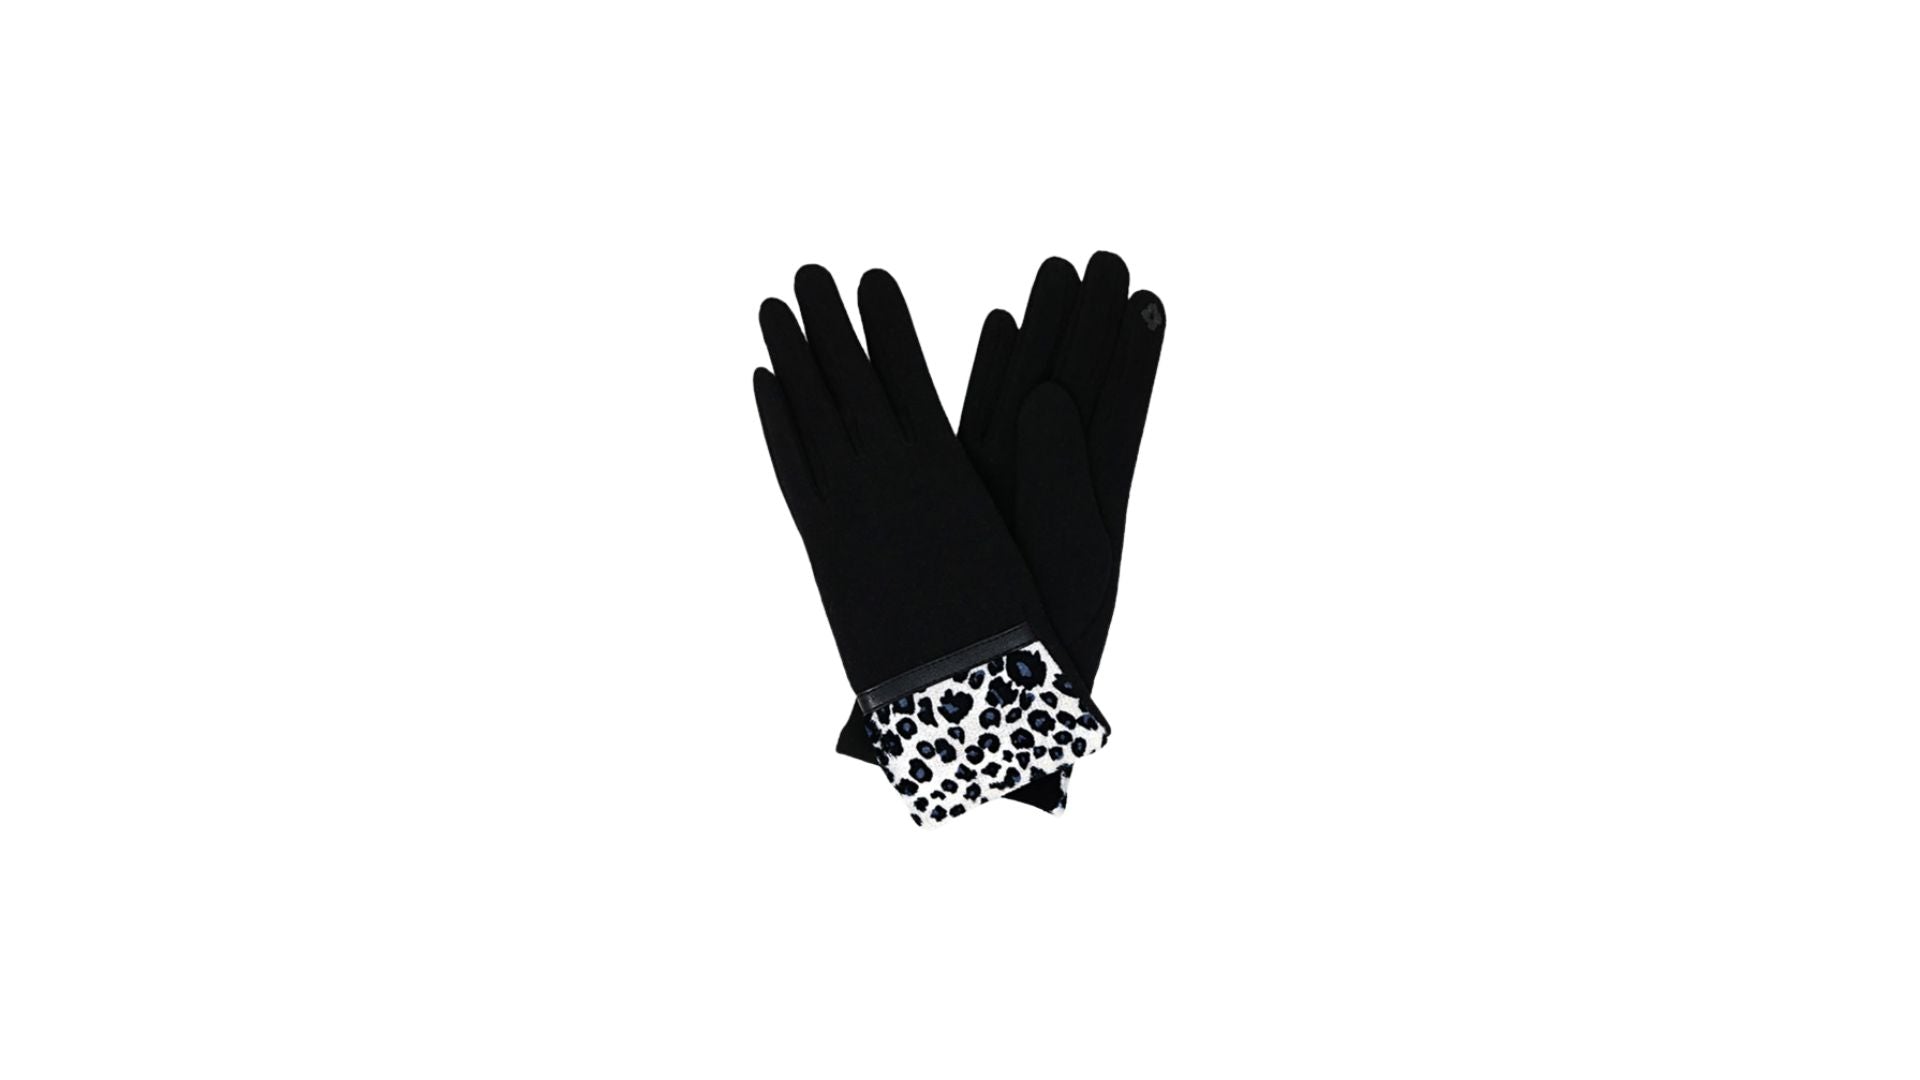 Gloves
<div style="text-align: center;"><em><strong>If we must wear gloves, who says they have to be boring - stylish, bold and fashion forward!</strong></em></div>

Le' Diva Boutique Store